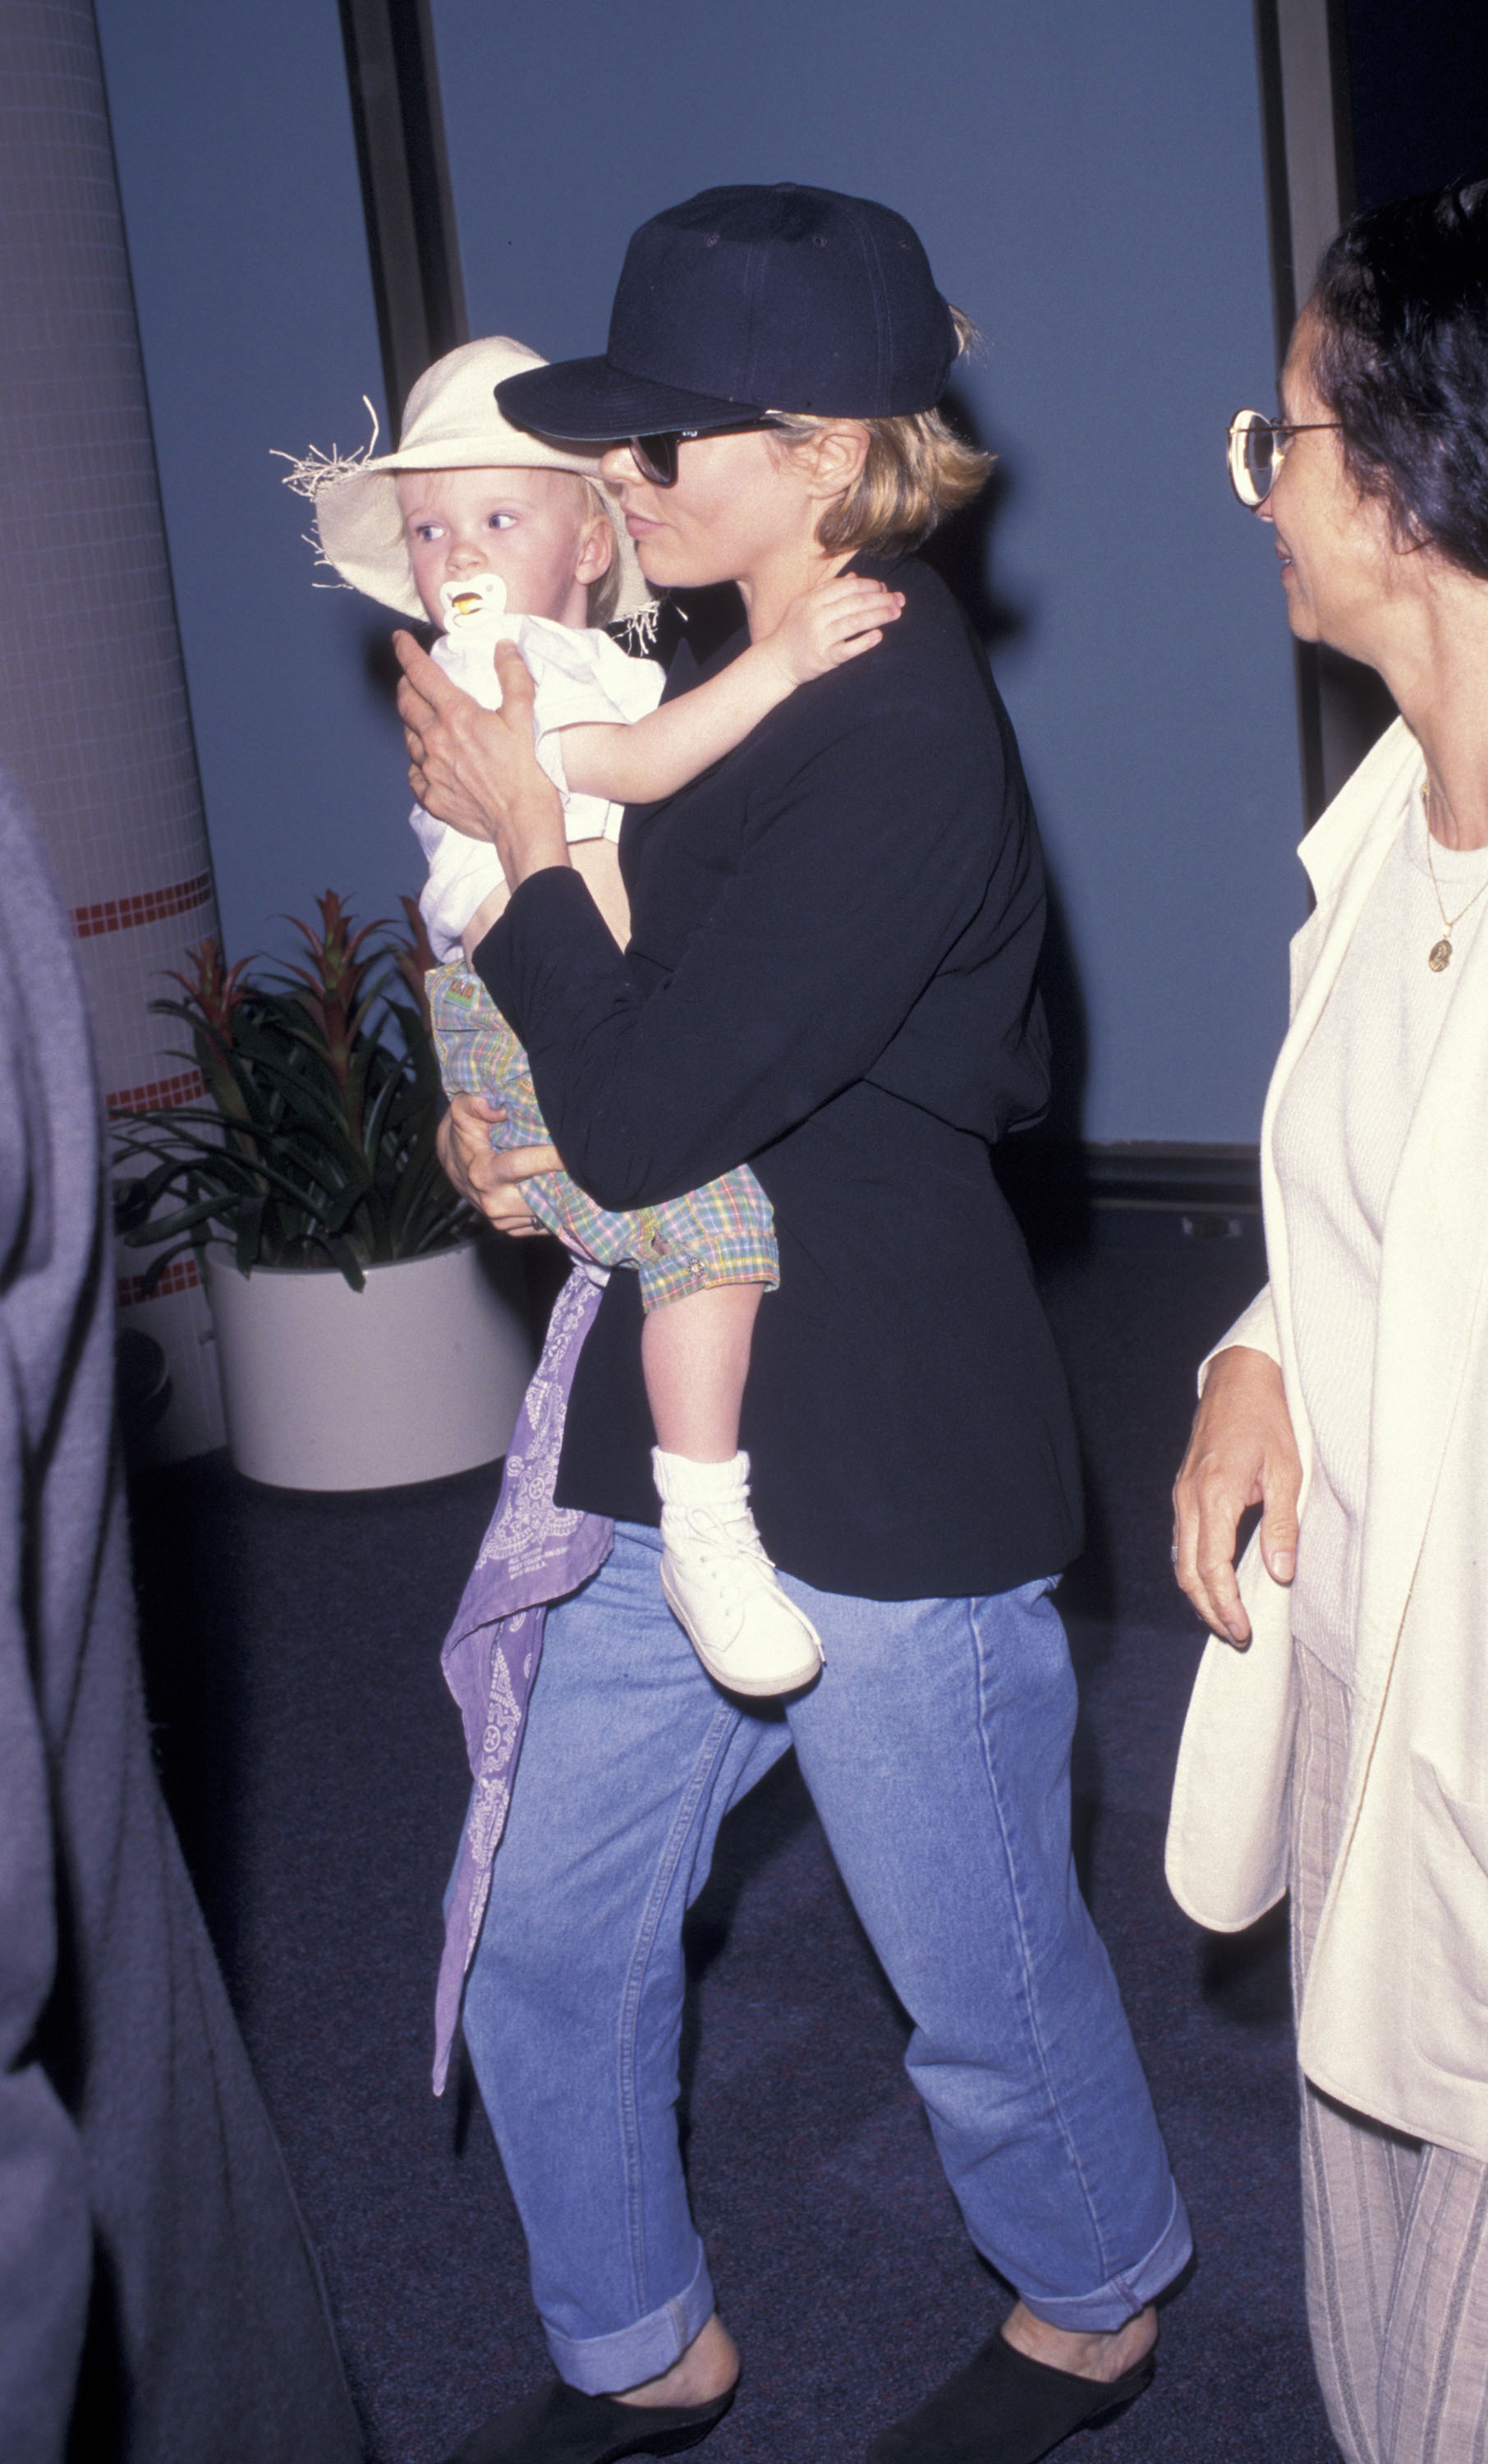 Kim Basinger and baby Ireland Baldwin at the Los Angeles International Airport on July 12, 1997 | Source: Getty Images